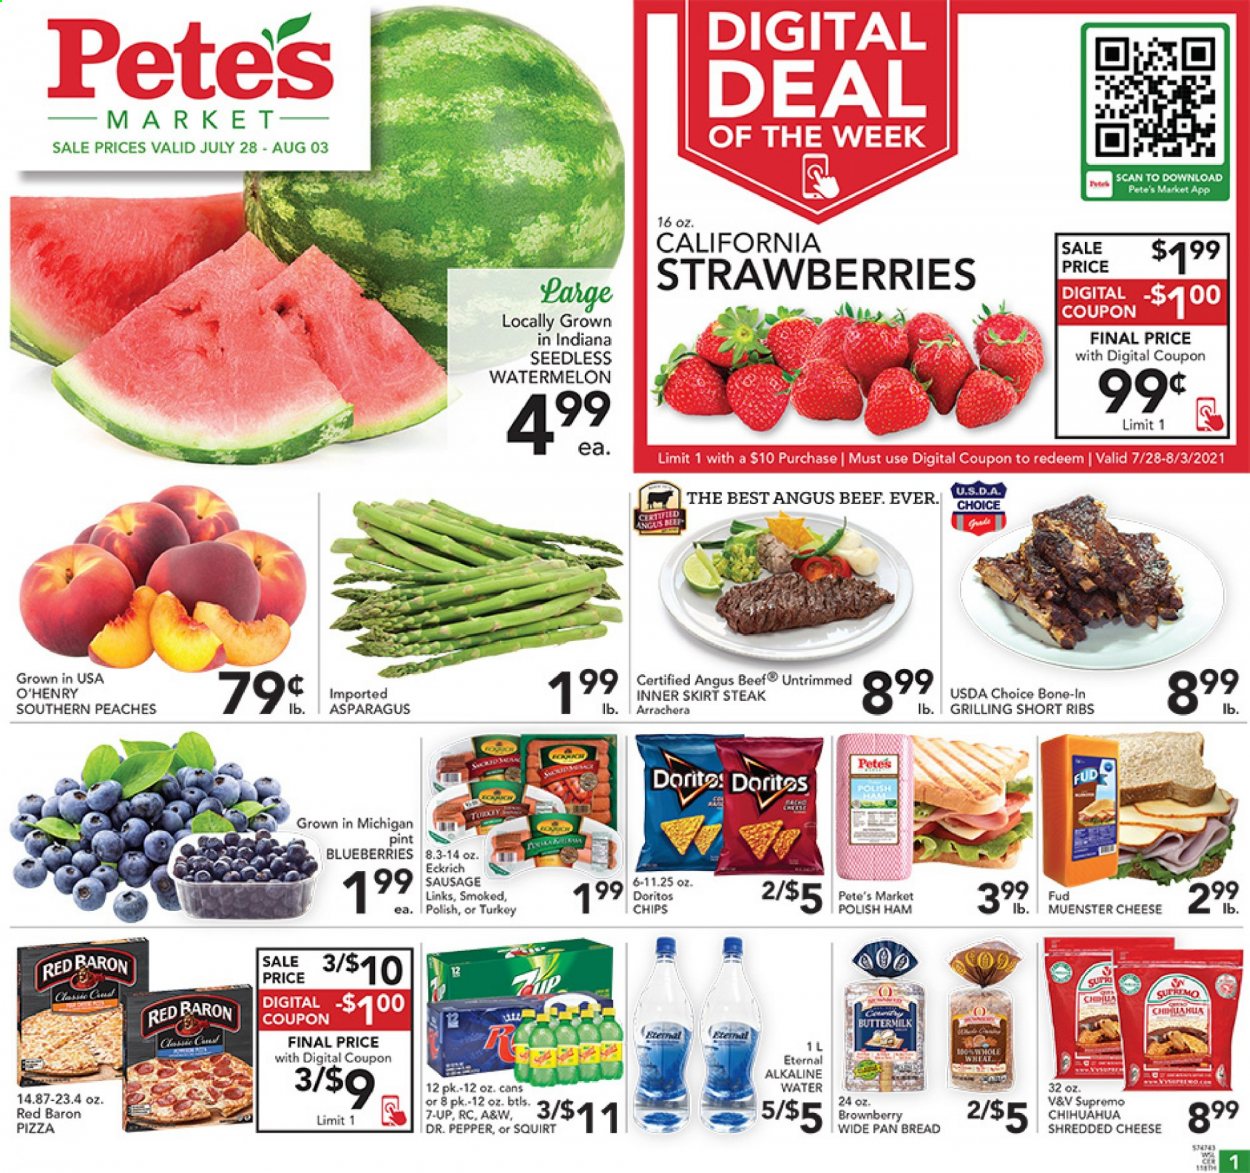 thumbnail - Pete's Fresh Market Flyer - 07/28/2021 - 08/03/2021 - Sales products - bread, asparagus, blueberries, strawberries, watermelon, pizza, ham, sausage, shredded cheese, Münster cheese, buttermilk, Red Baron, Doritos, chips, Dr. Pepper, 7UP, A&W, alkaline water, beef meat, steak, peaches. Page 1.